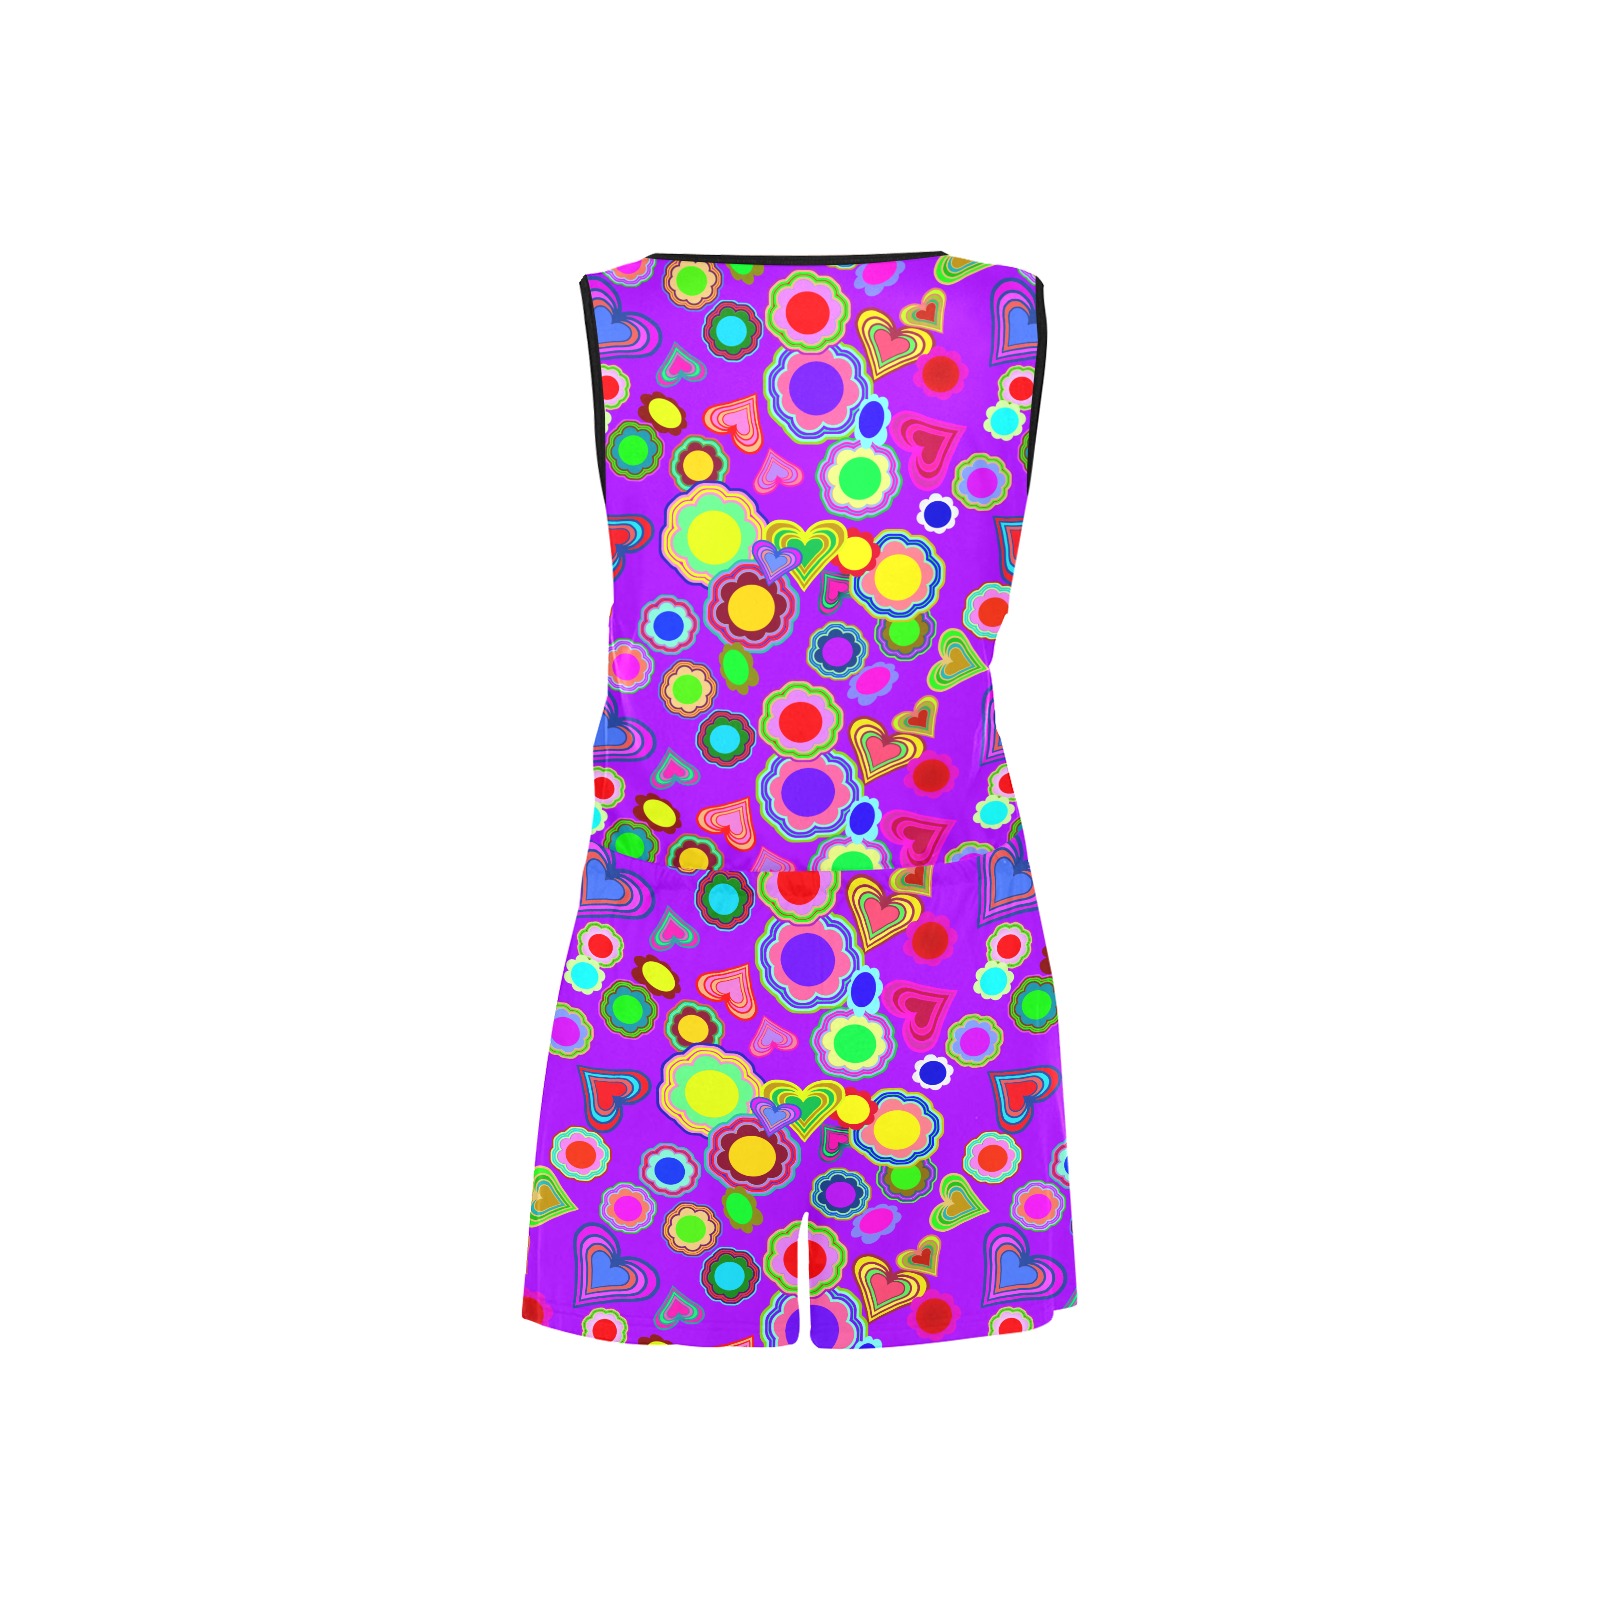 Groovy Hearts and Flowers Purple All Over Print Short Jumpsuit